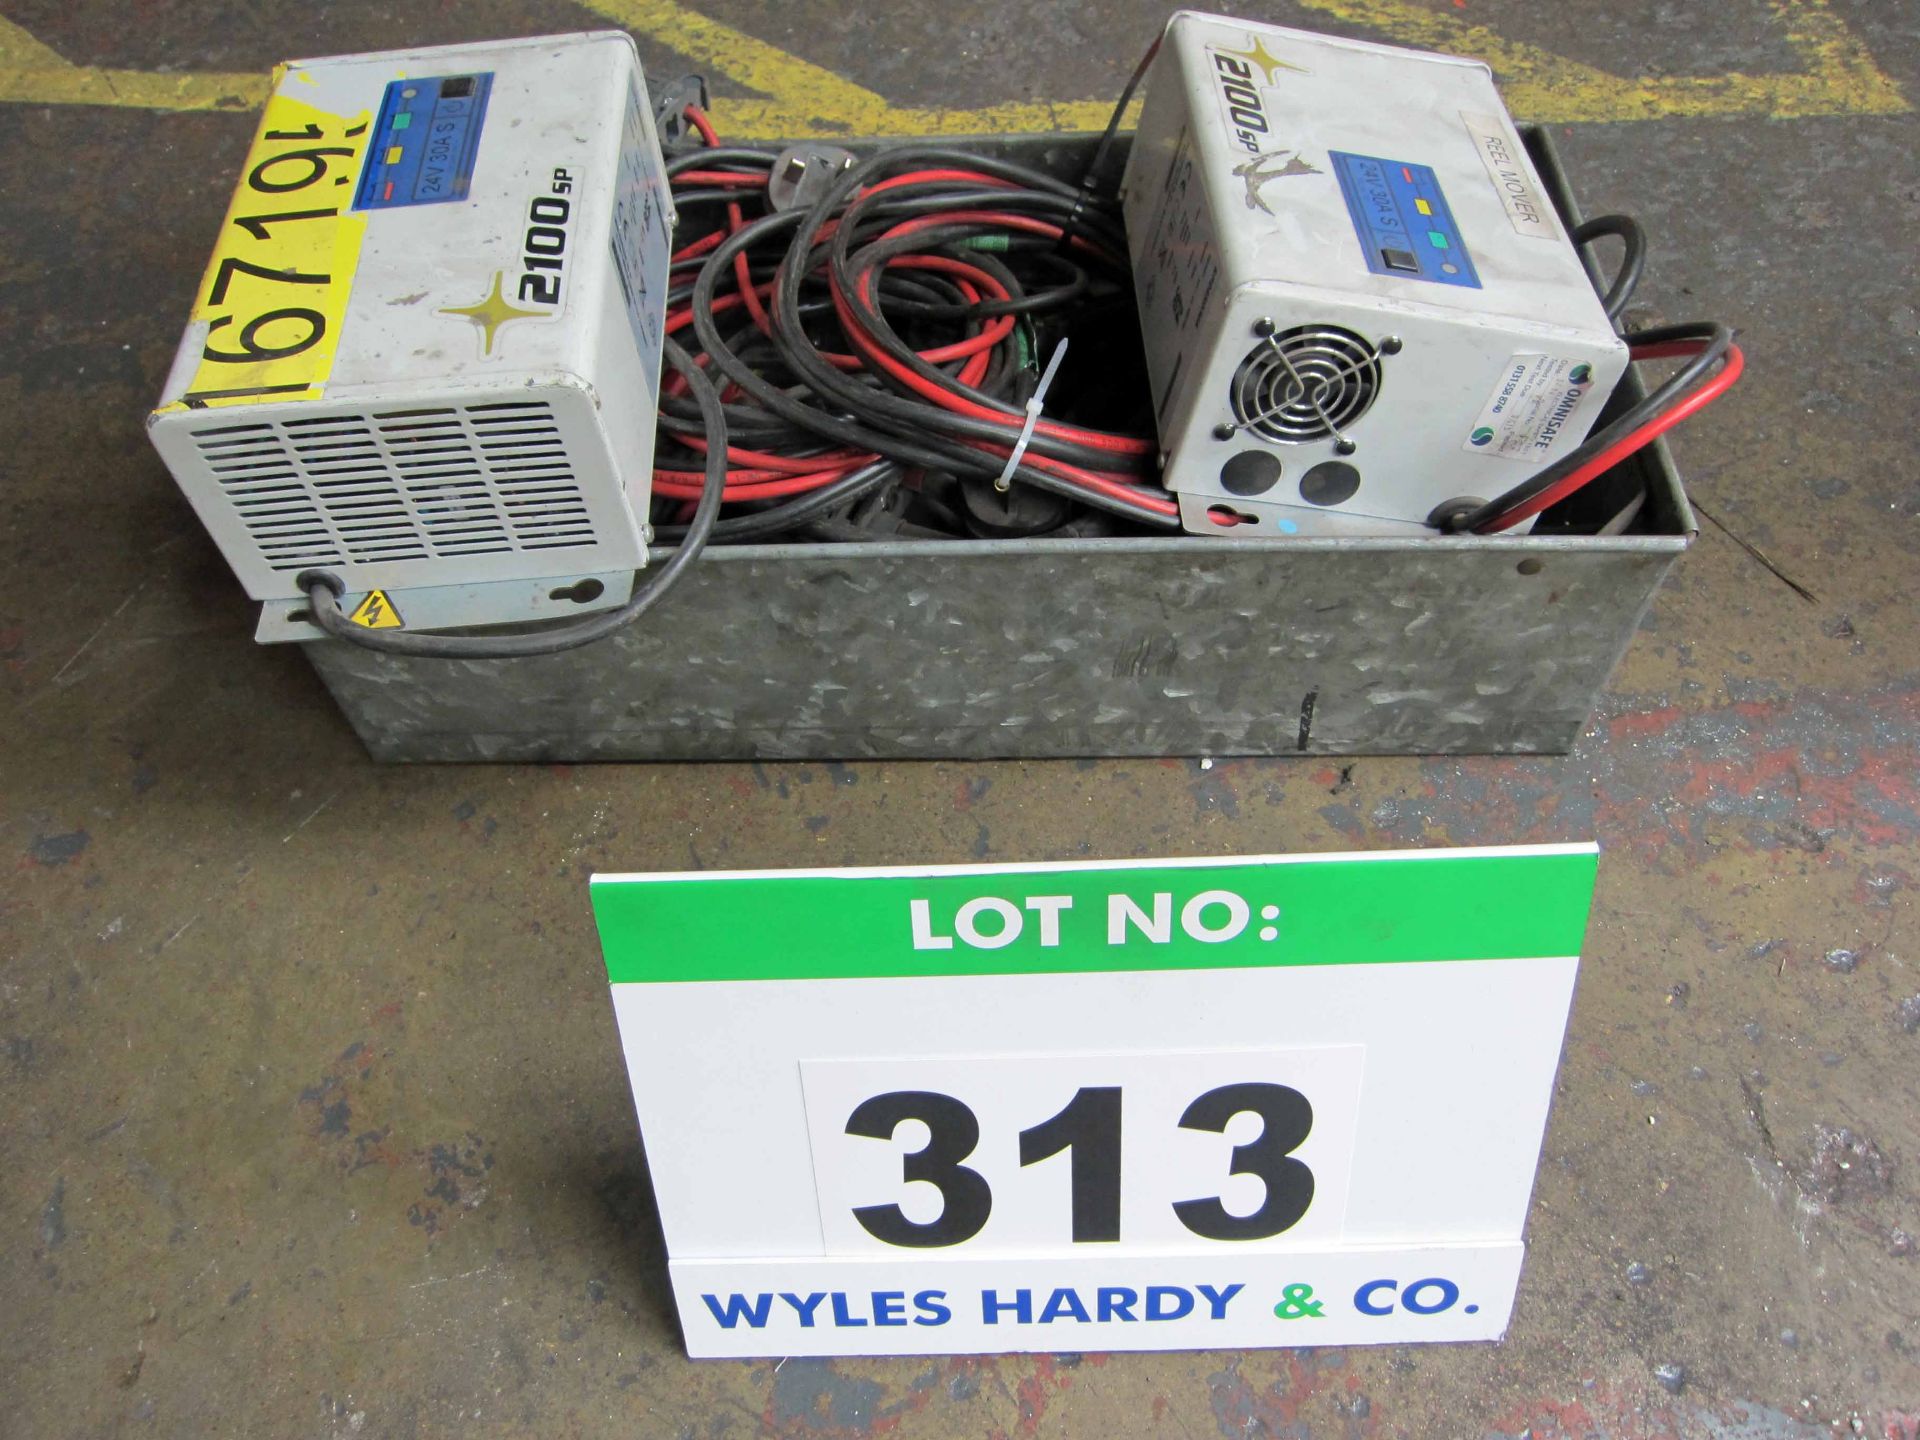 Two EXIDE Type 2100SP, 24V, 30 Amp Single Phase Battery Chargers and A Quantity of Charger Leads